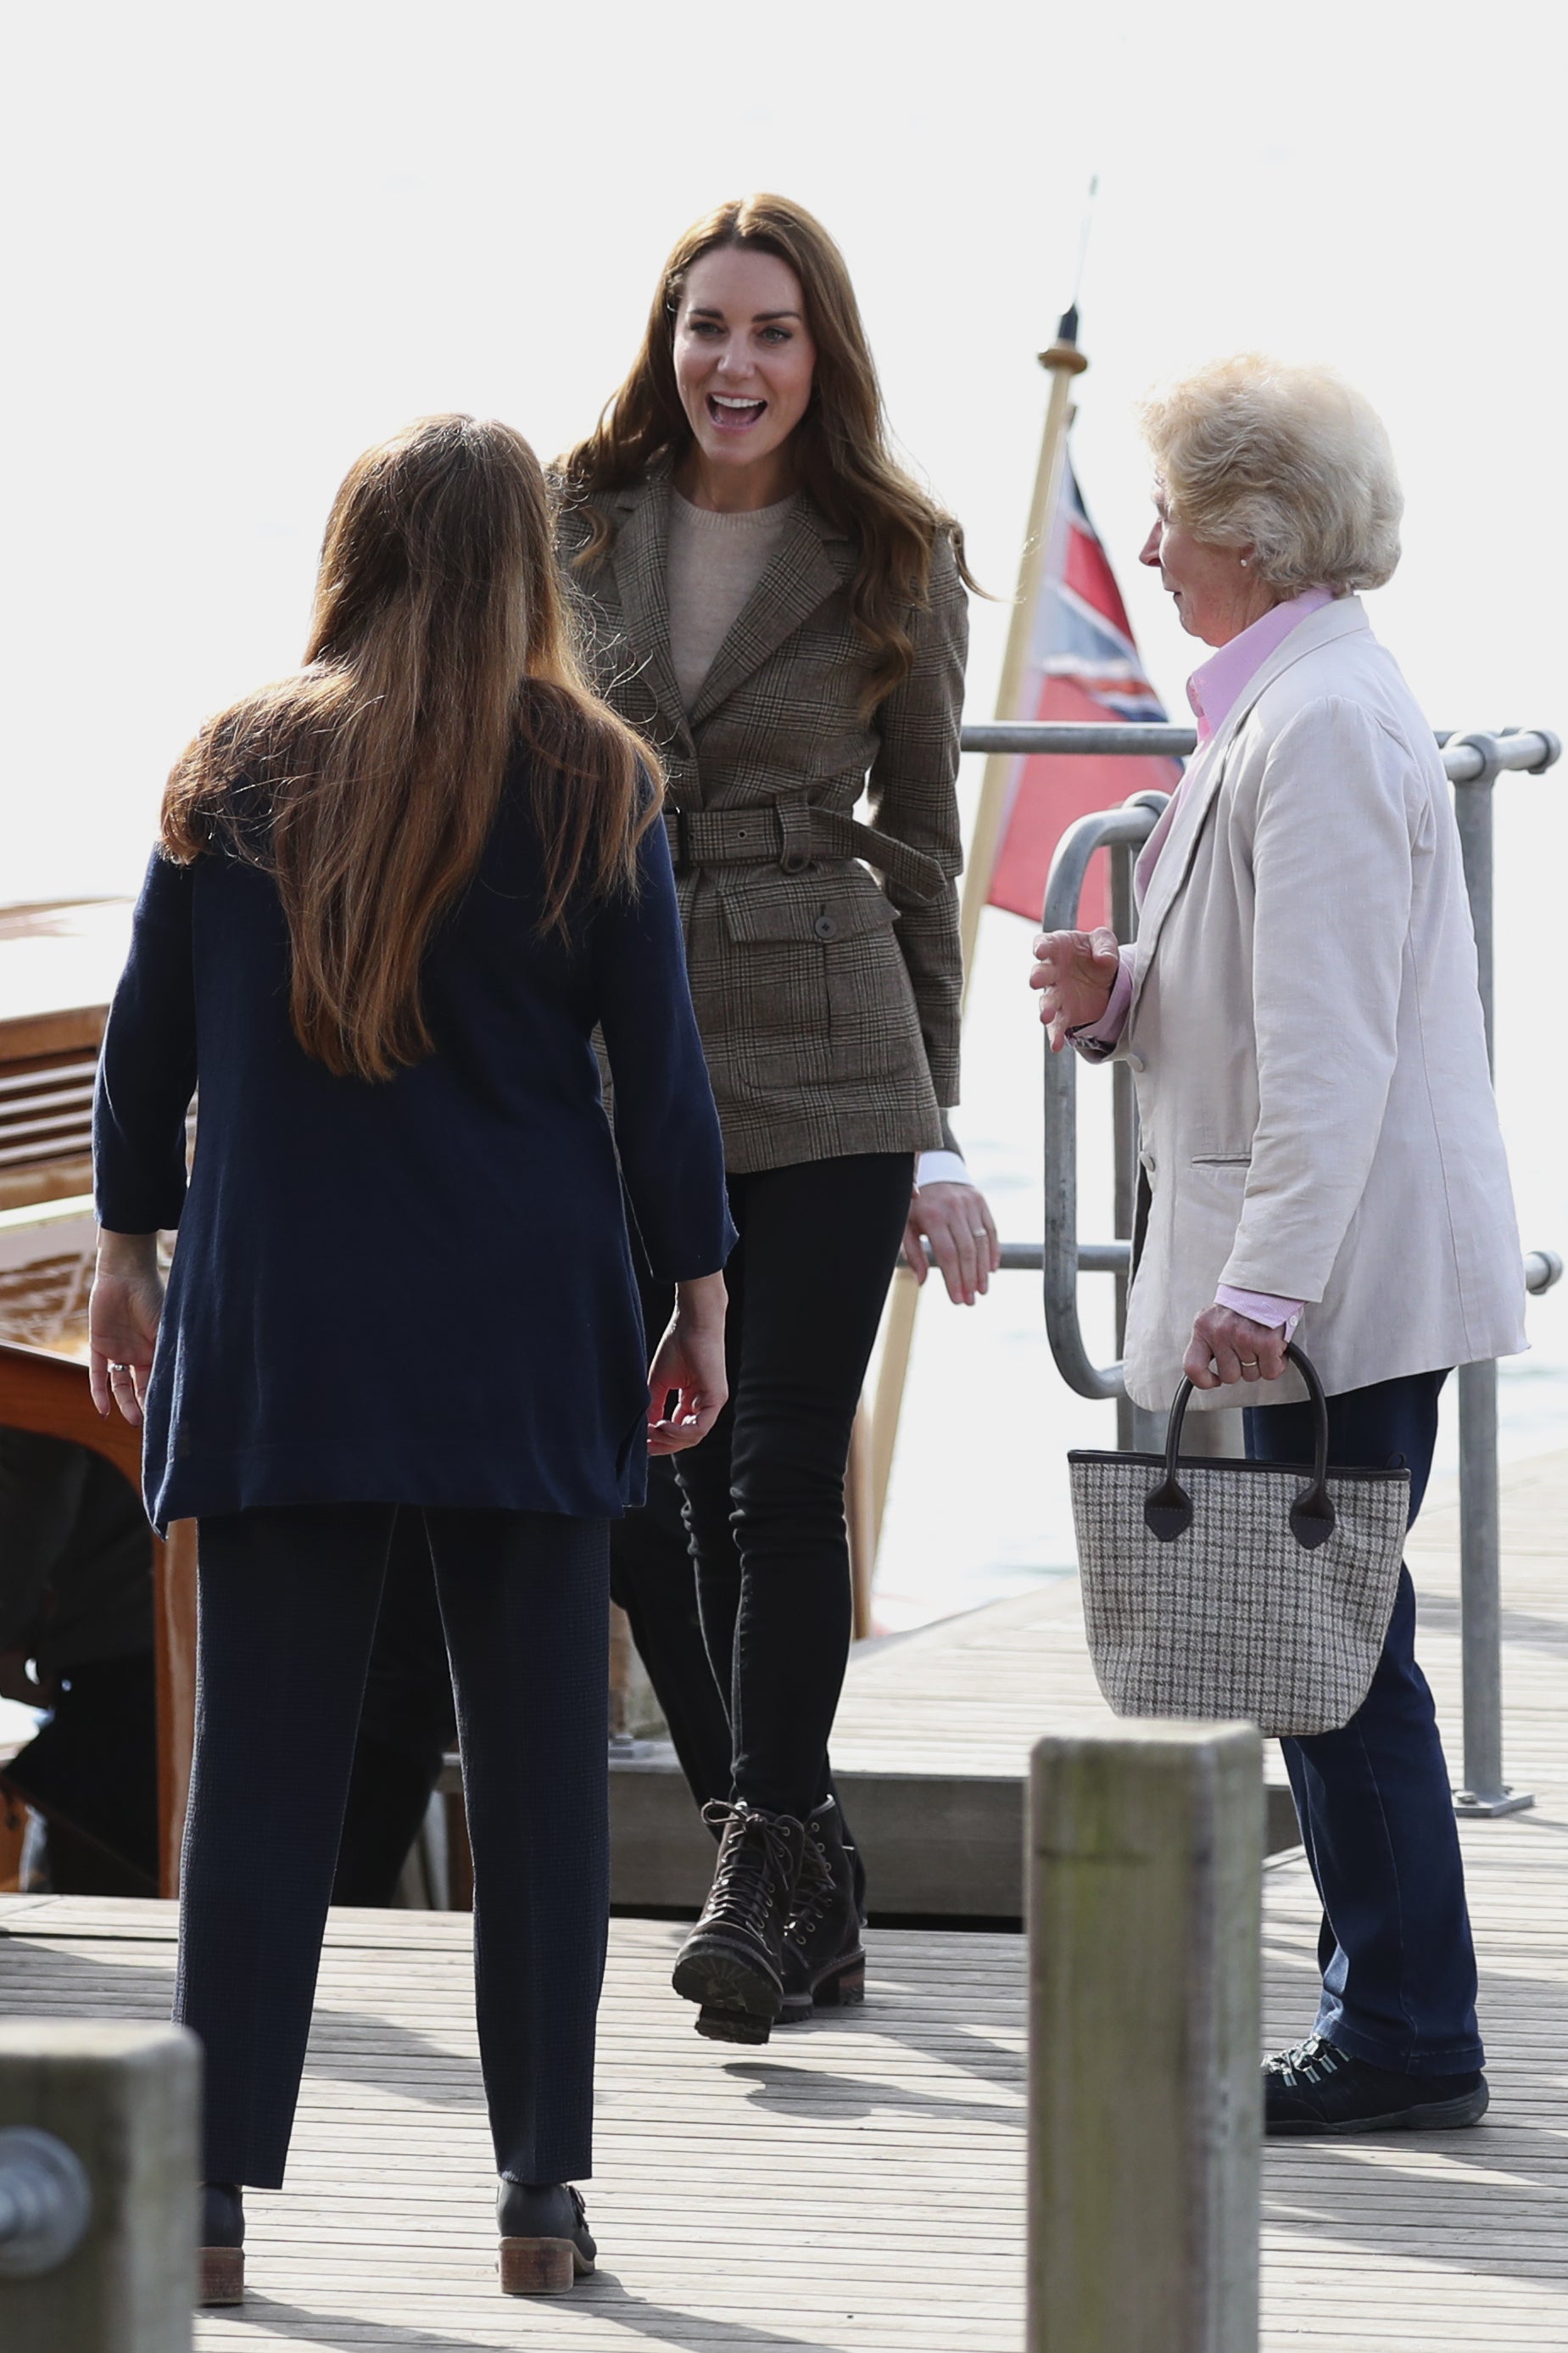 The Duchess of Cambridge visits Lake Windermere (Scott Heppell/PA)